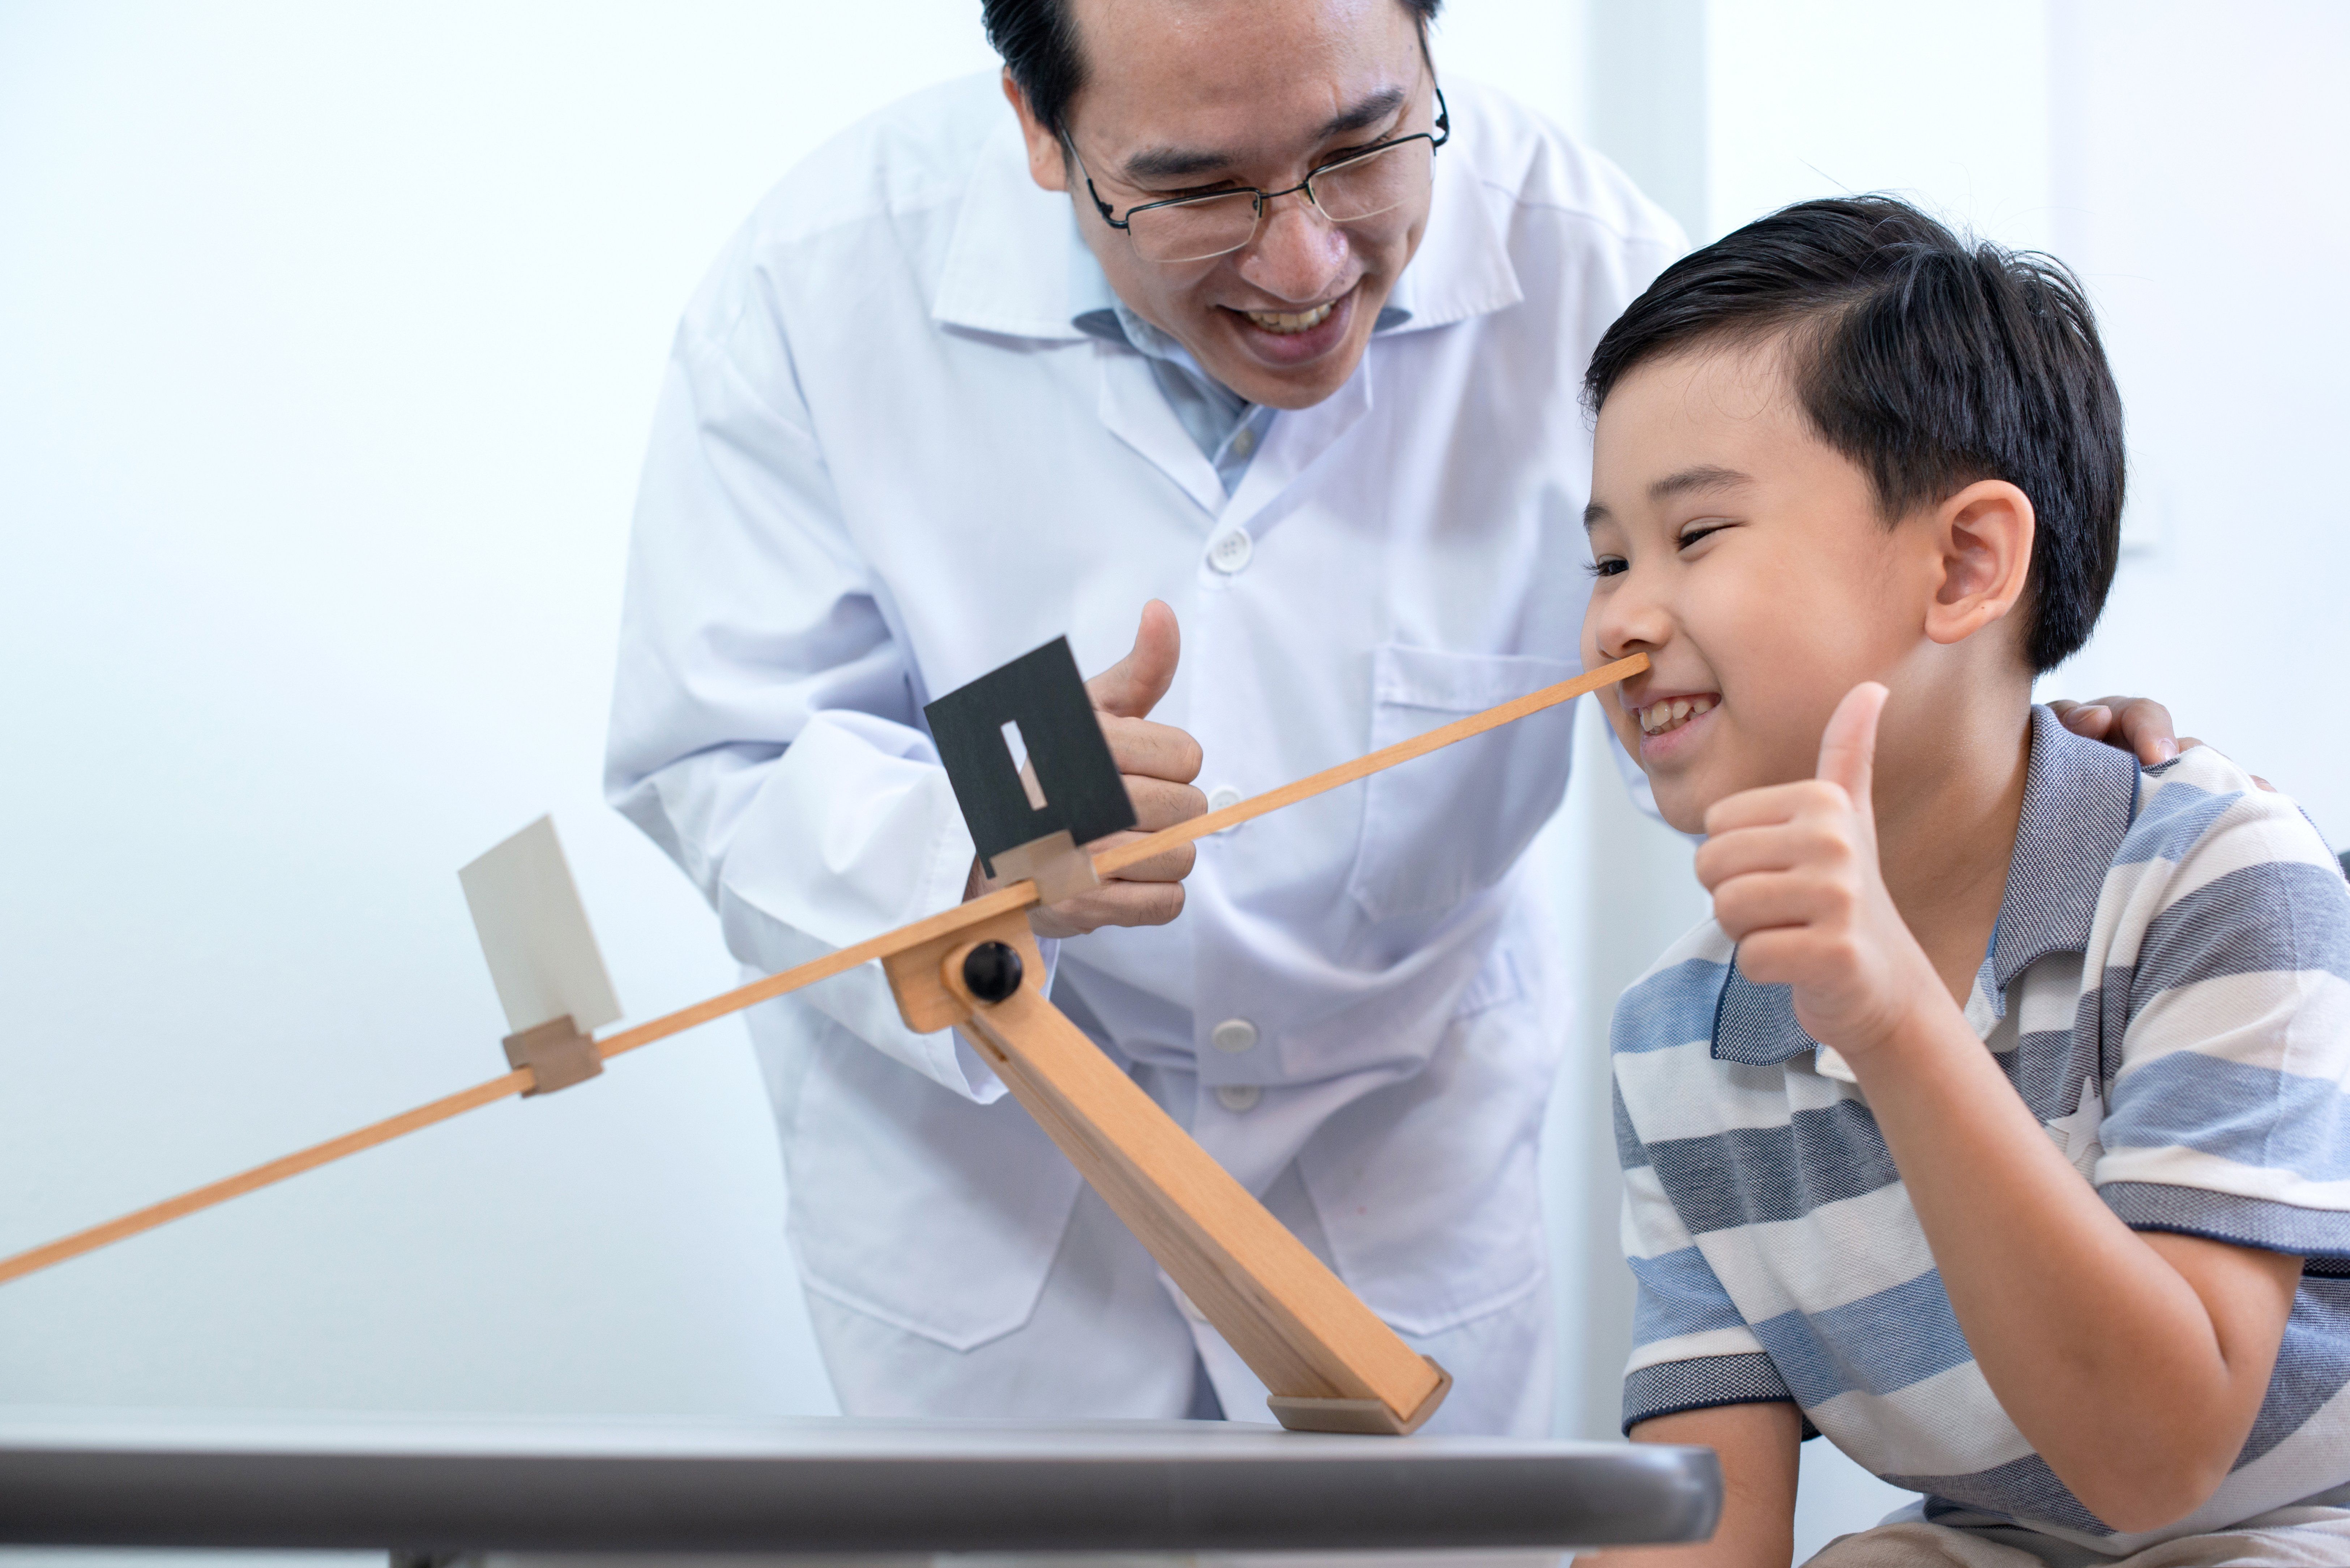 What Skills Can Be Developed Through Vision Therapy?